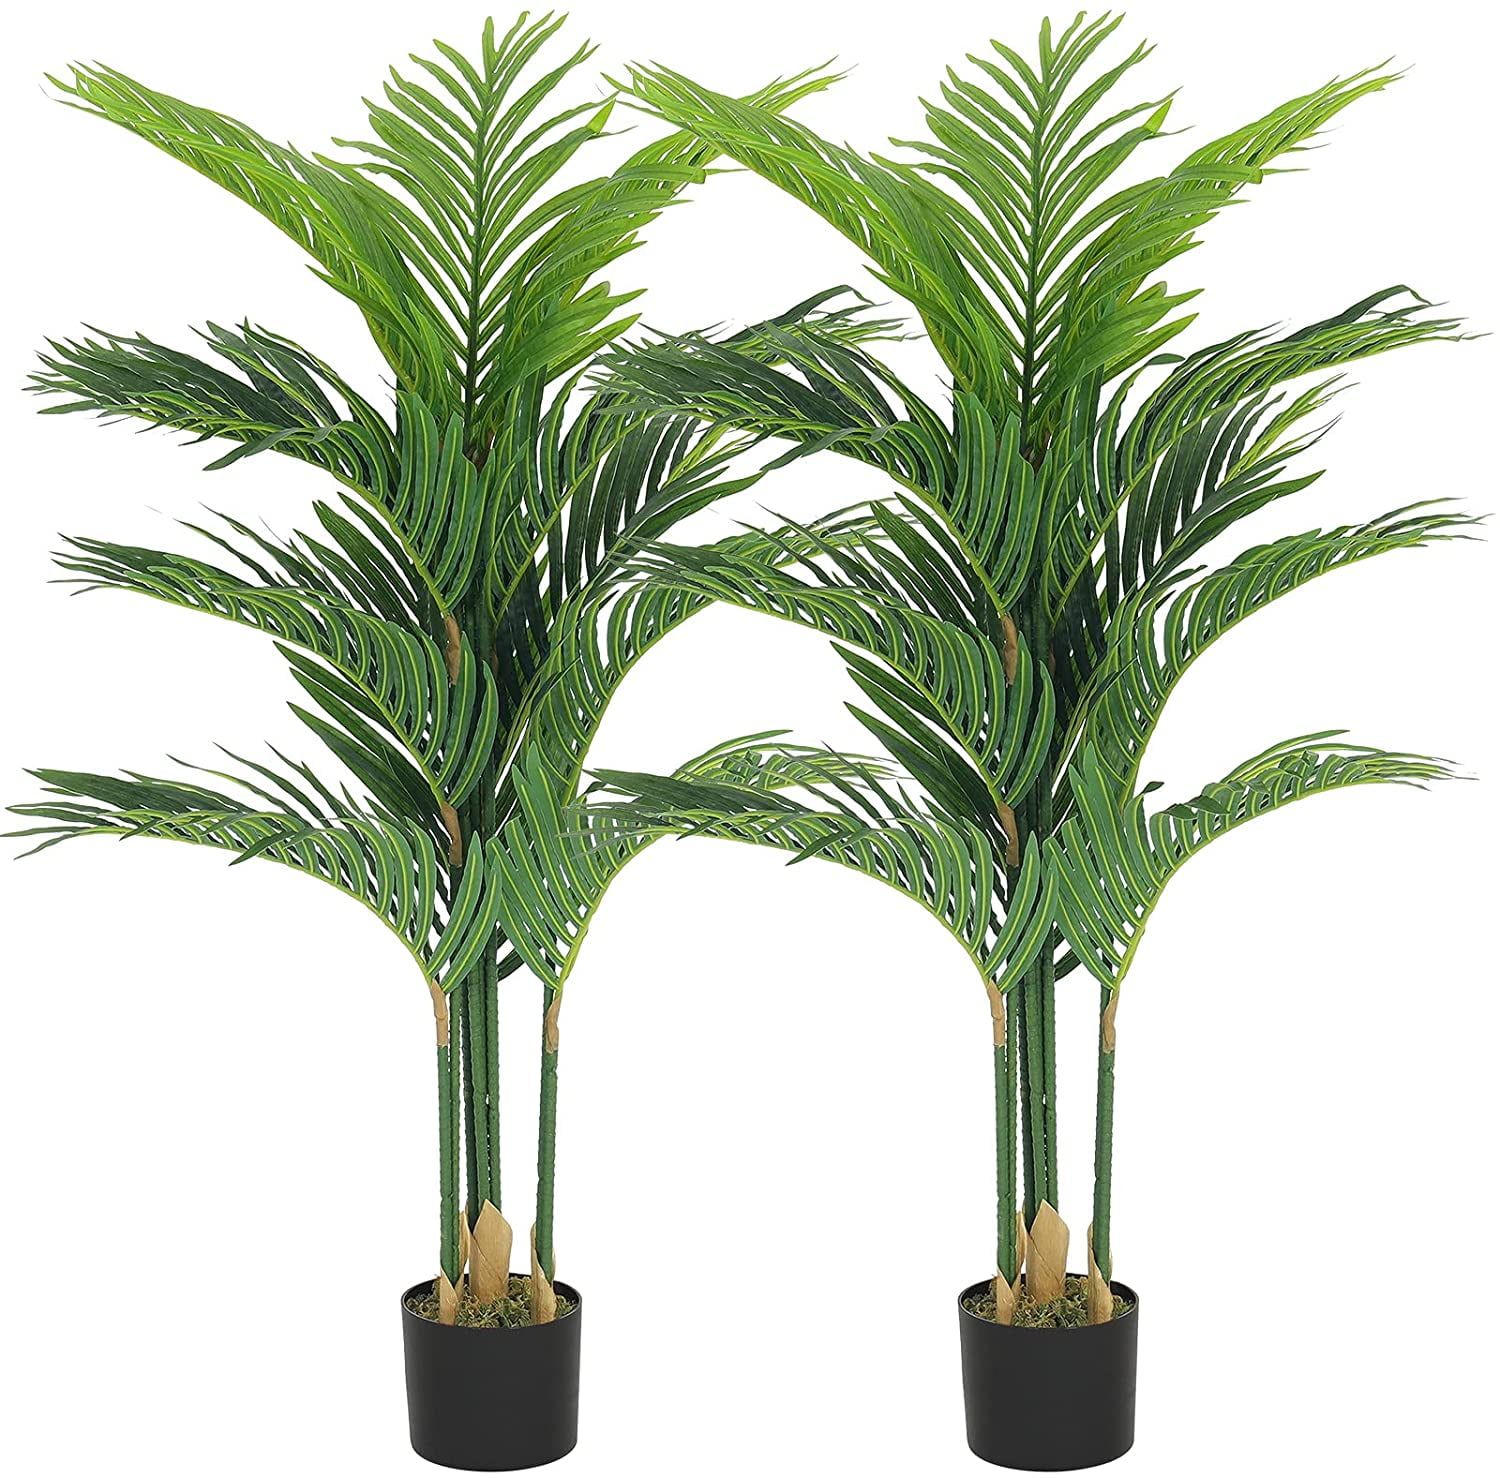 Artificial Plant 4 ft Areca Palm Tree Real Touch Feel with Plastic Container 